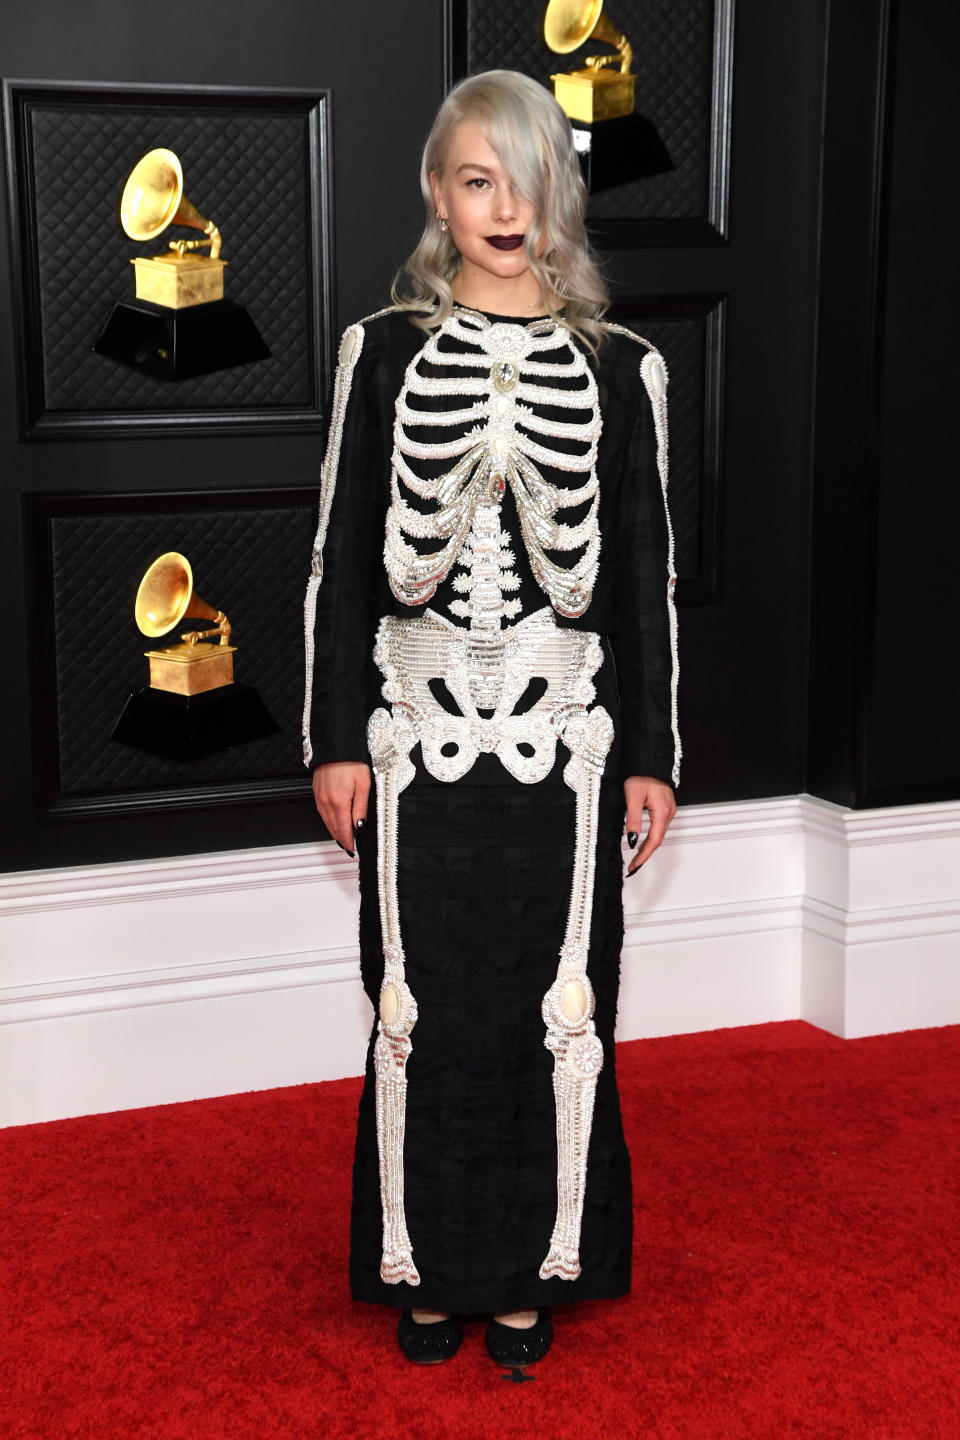 LOS ANGELES, CALIFORNIA - MARCH 14: Phoebe Bridgers attends the 63rd Annual GRAMMY Awards at Los Angeles Convention Center on March 14, 2021 in Los Angeles, California. (Photo by Kevin Mazur/Getty Images for The Recording Academy )